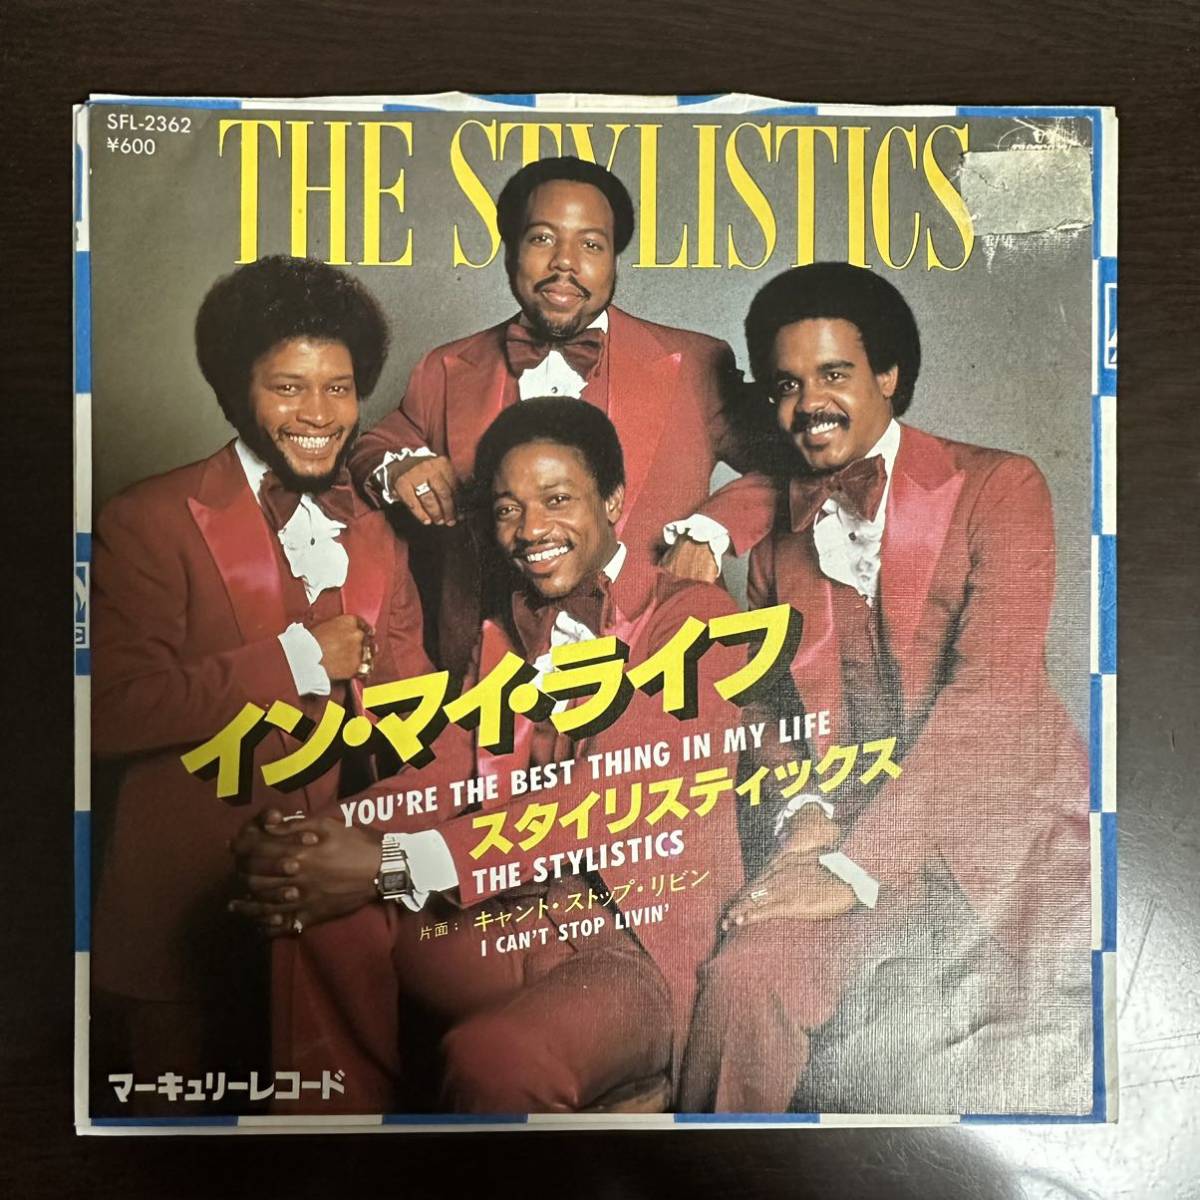 【disco】 THE STYLISTICS - YOU'RE THE BEST THING IN MY LIFE スタイリスティックス イン・マイ・ライフ_画像1